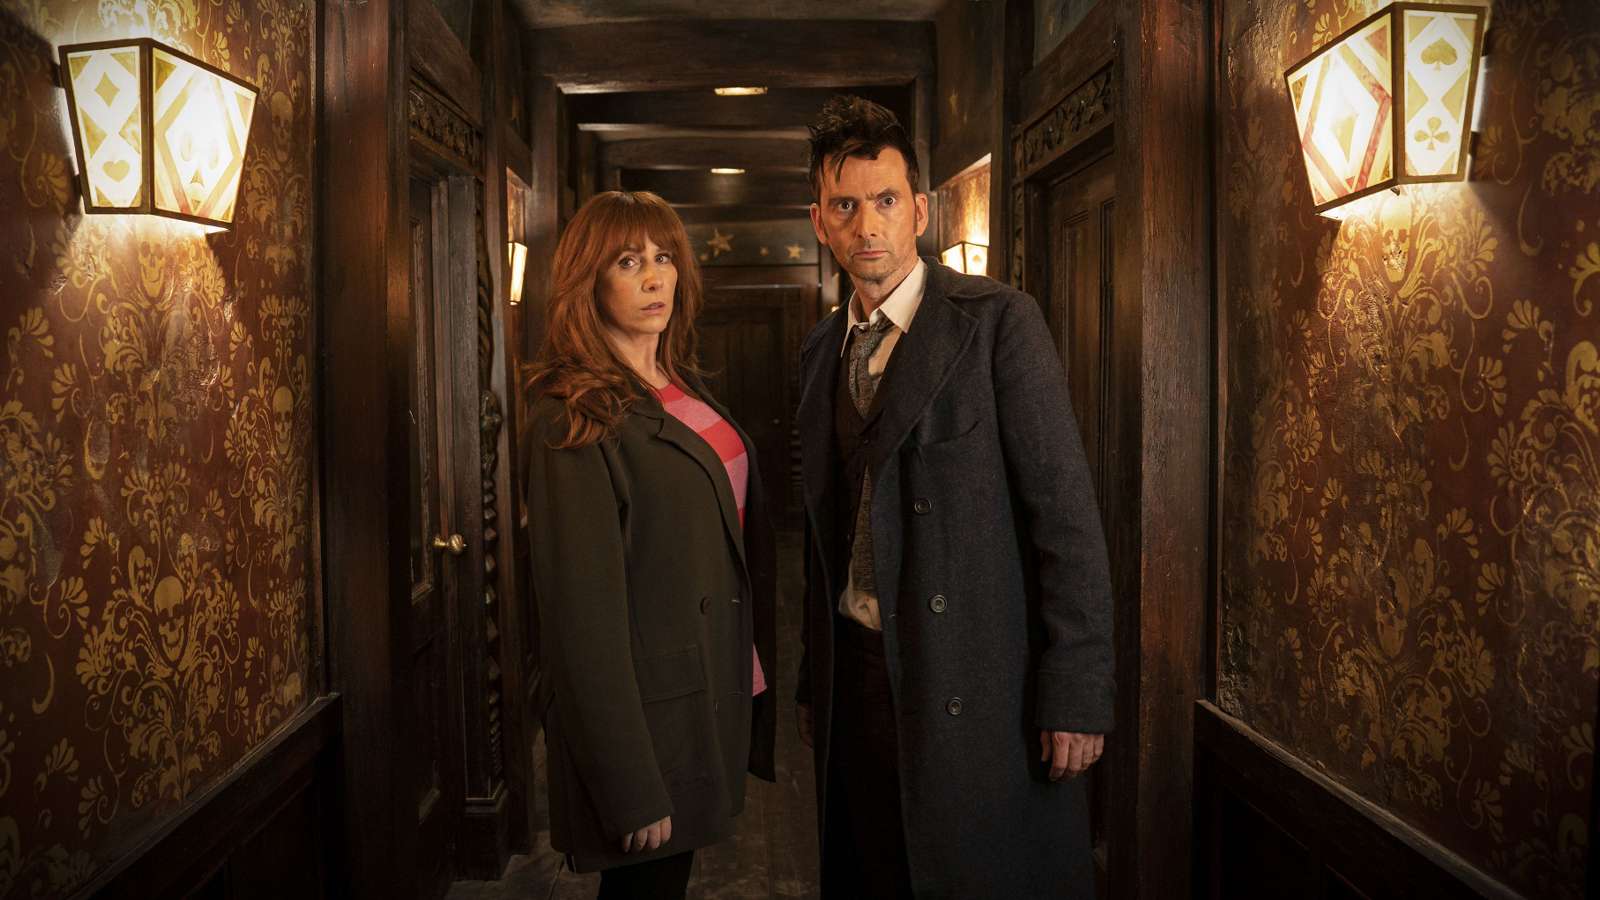 The Fourteenth Doctor and Donna Noble in Doctor Who special, 'The Giggle'